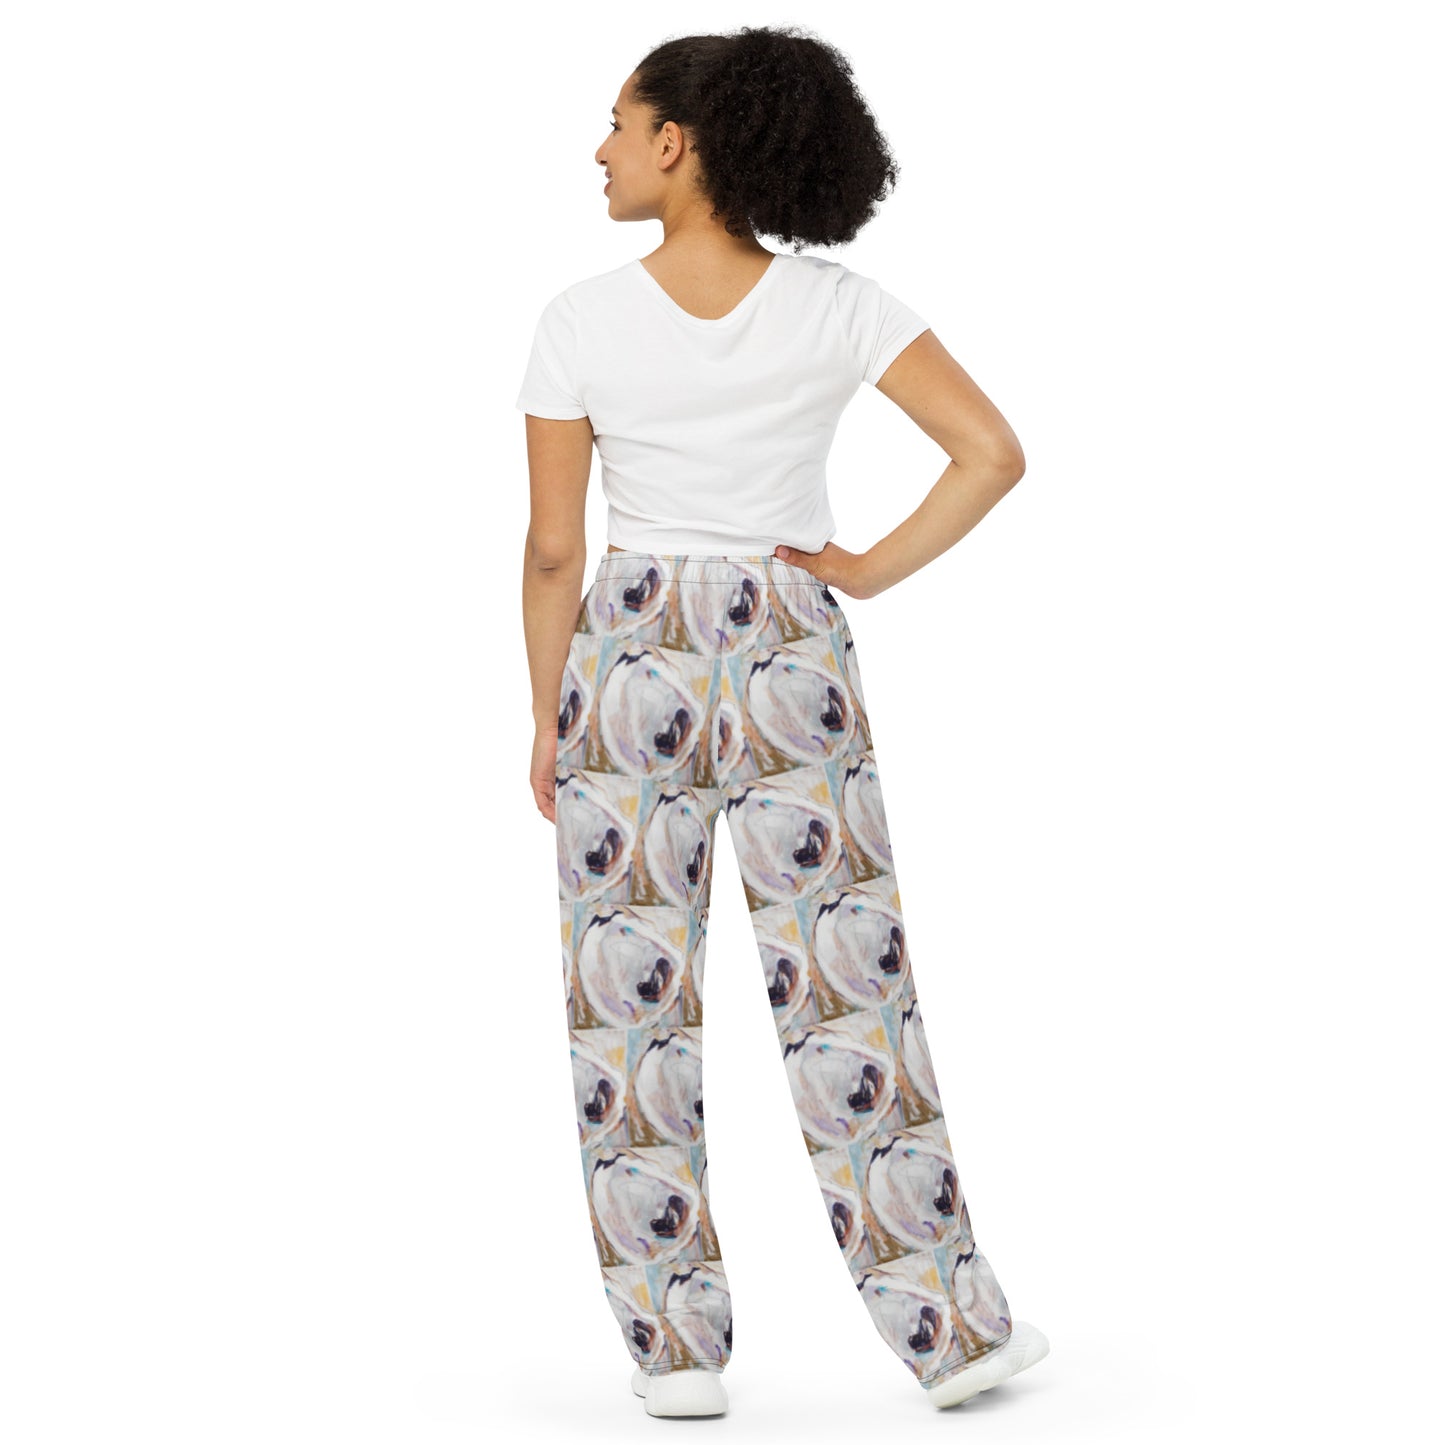 Oyster Shells All-over print unisex wide-leg pants